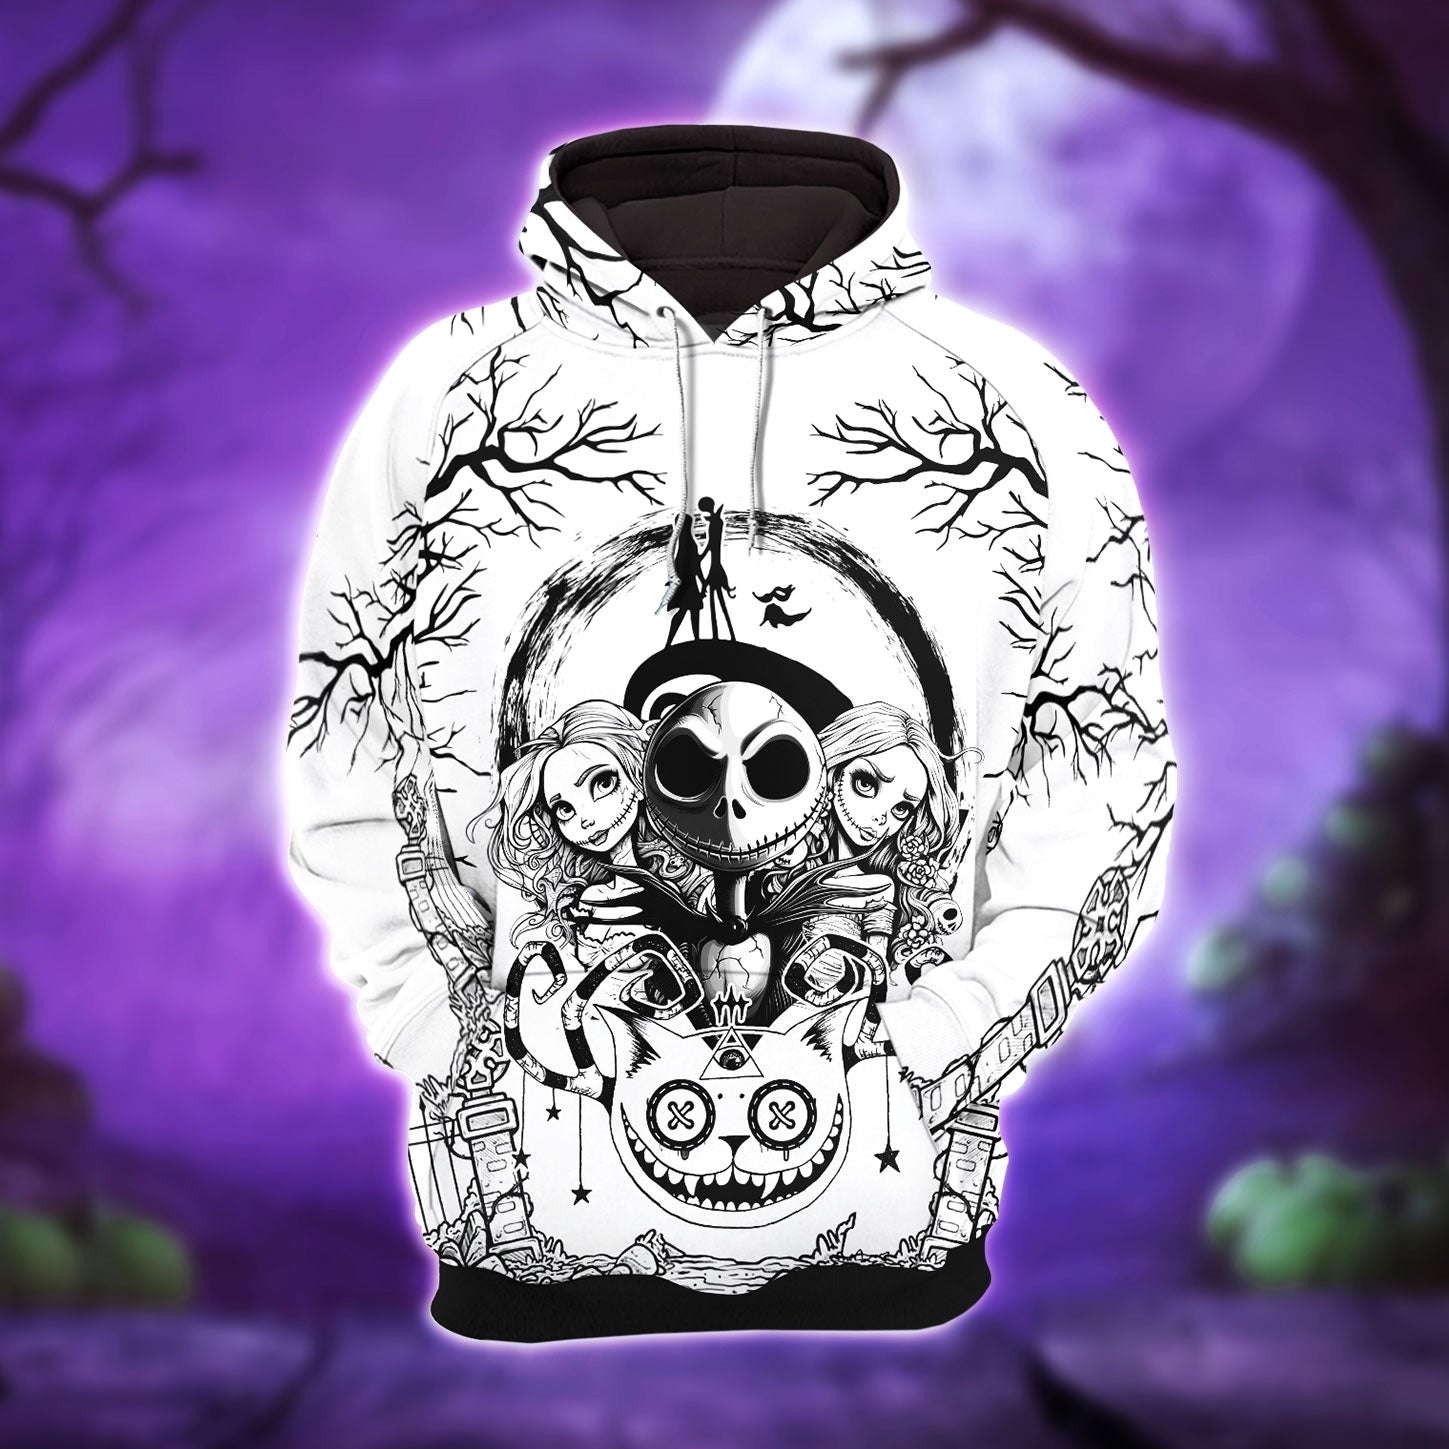 White Nightmare Theme Combo Hoodie and Leggings - Dark and edgy matching set with skull designs for a unique and stylish look